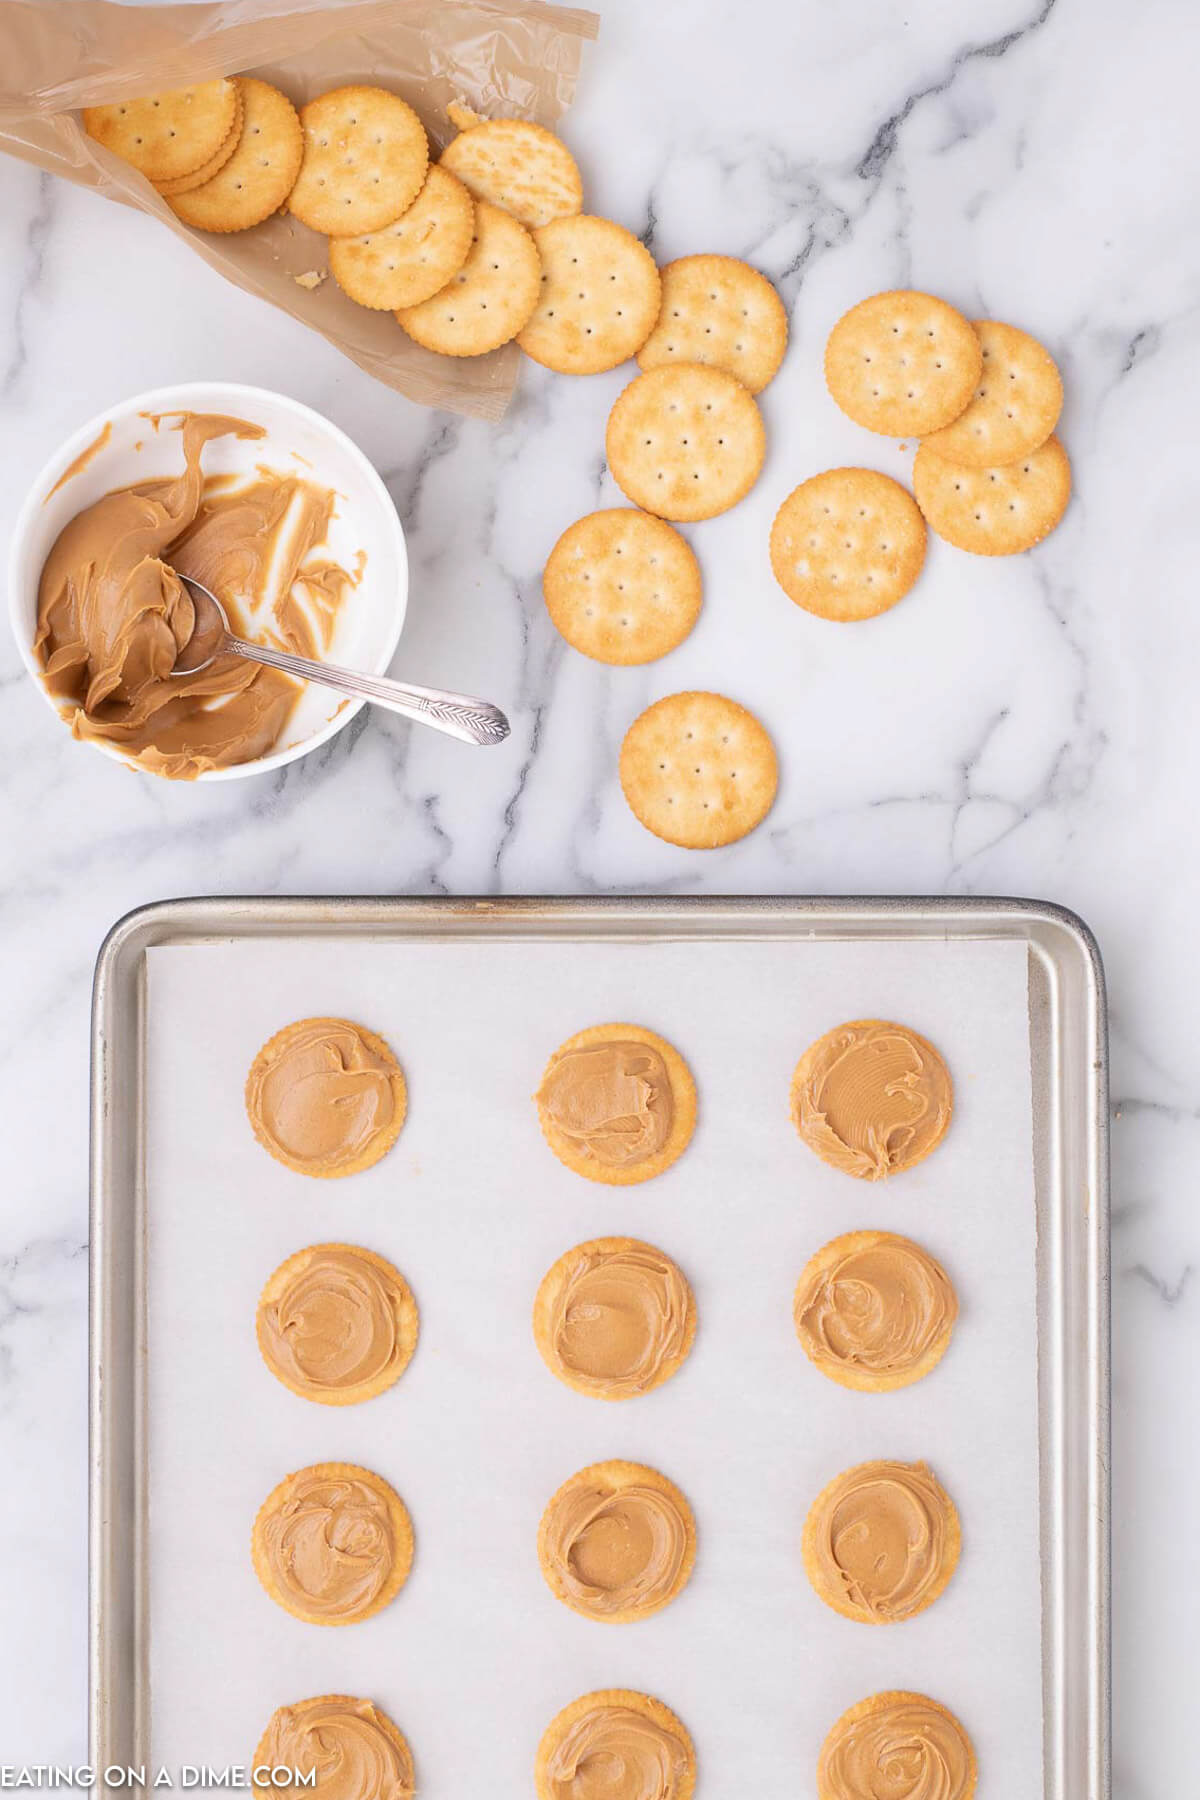 Ritz Crackers laid on a baking sheet lined with parchment paper with peanut butter spread on top of the crackers.  